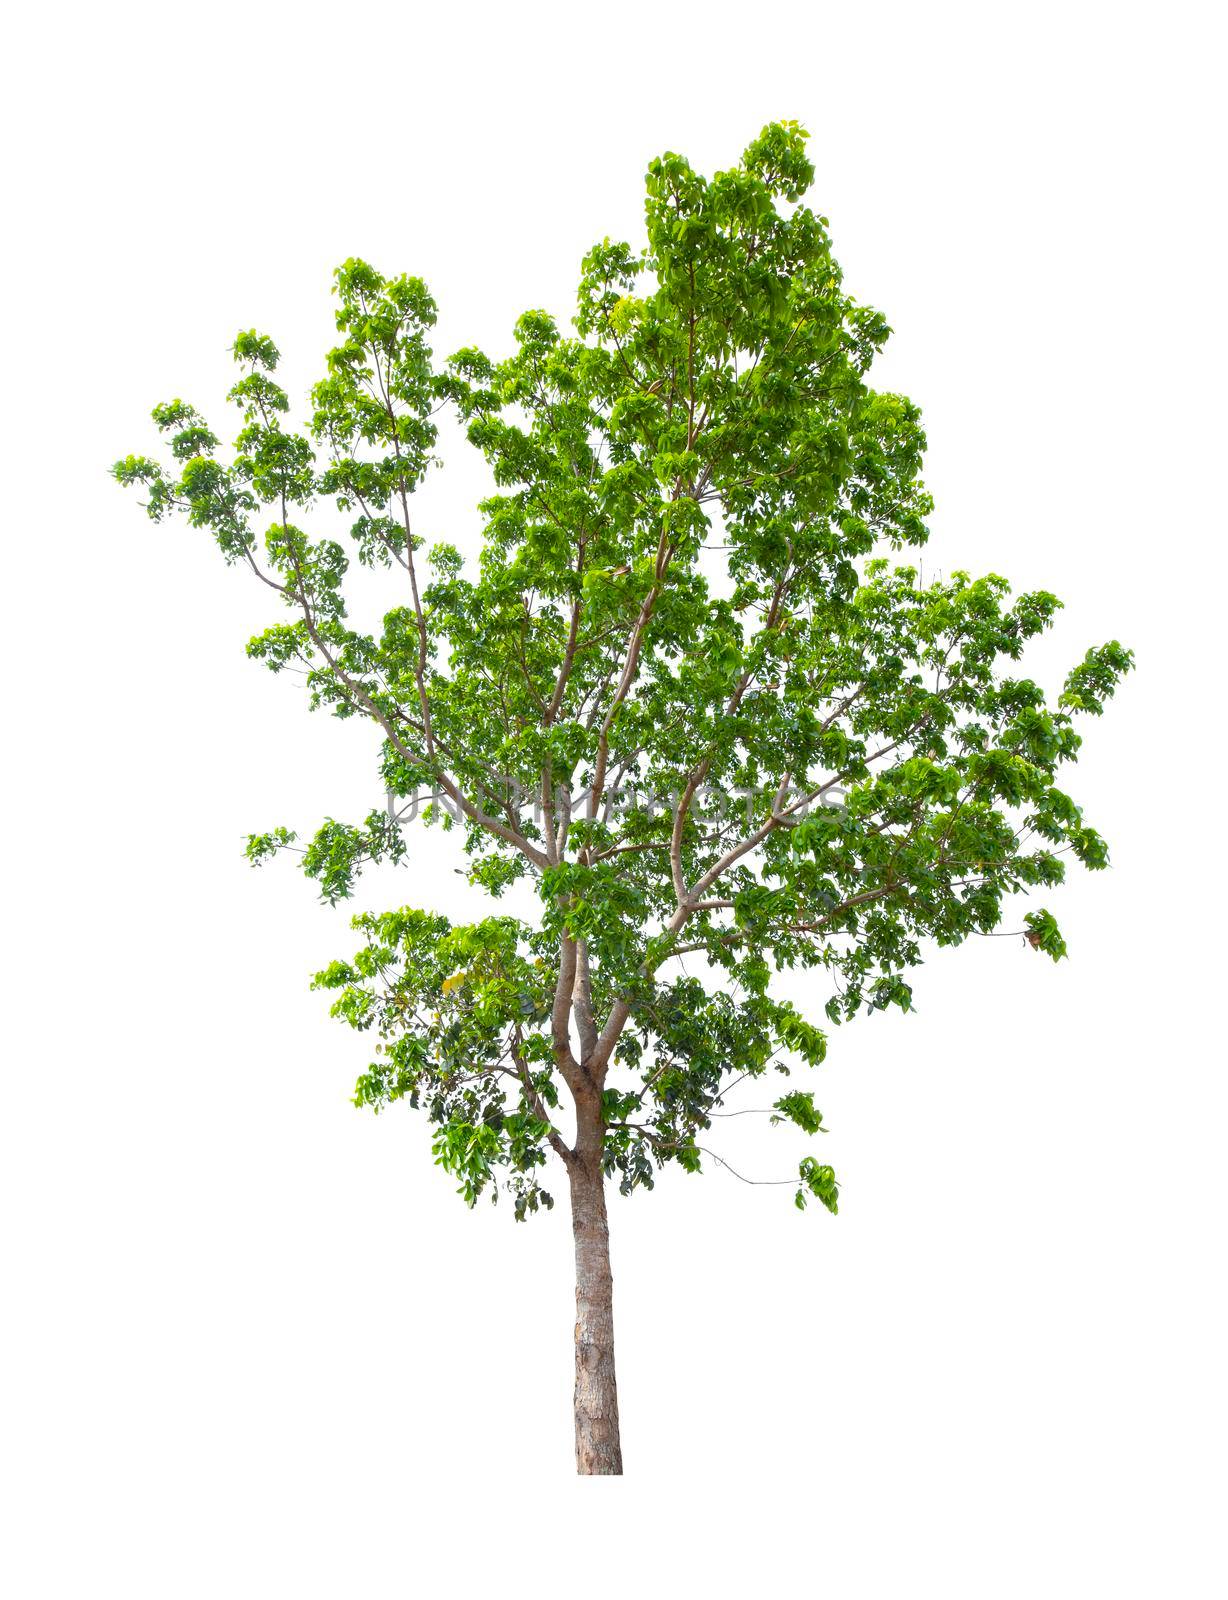 The Single Tree isolated on white background, With Clipping path. by Gamjai